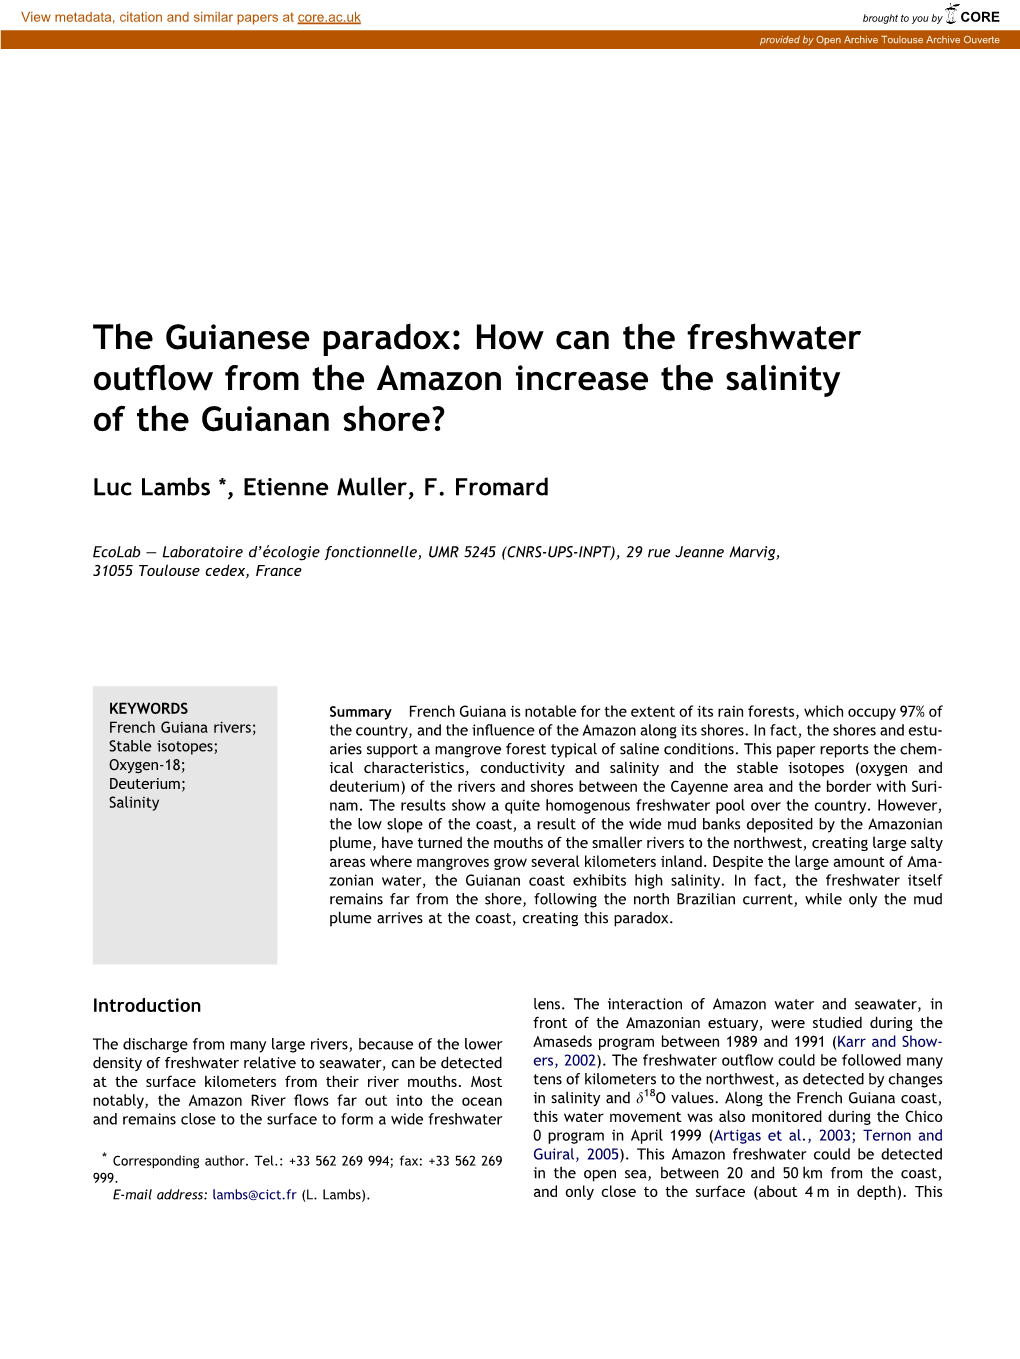 How Can the Freshwater Outflow from the Amazon Increase the Salinity of the Guianan Shore?